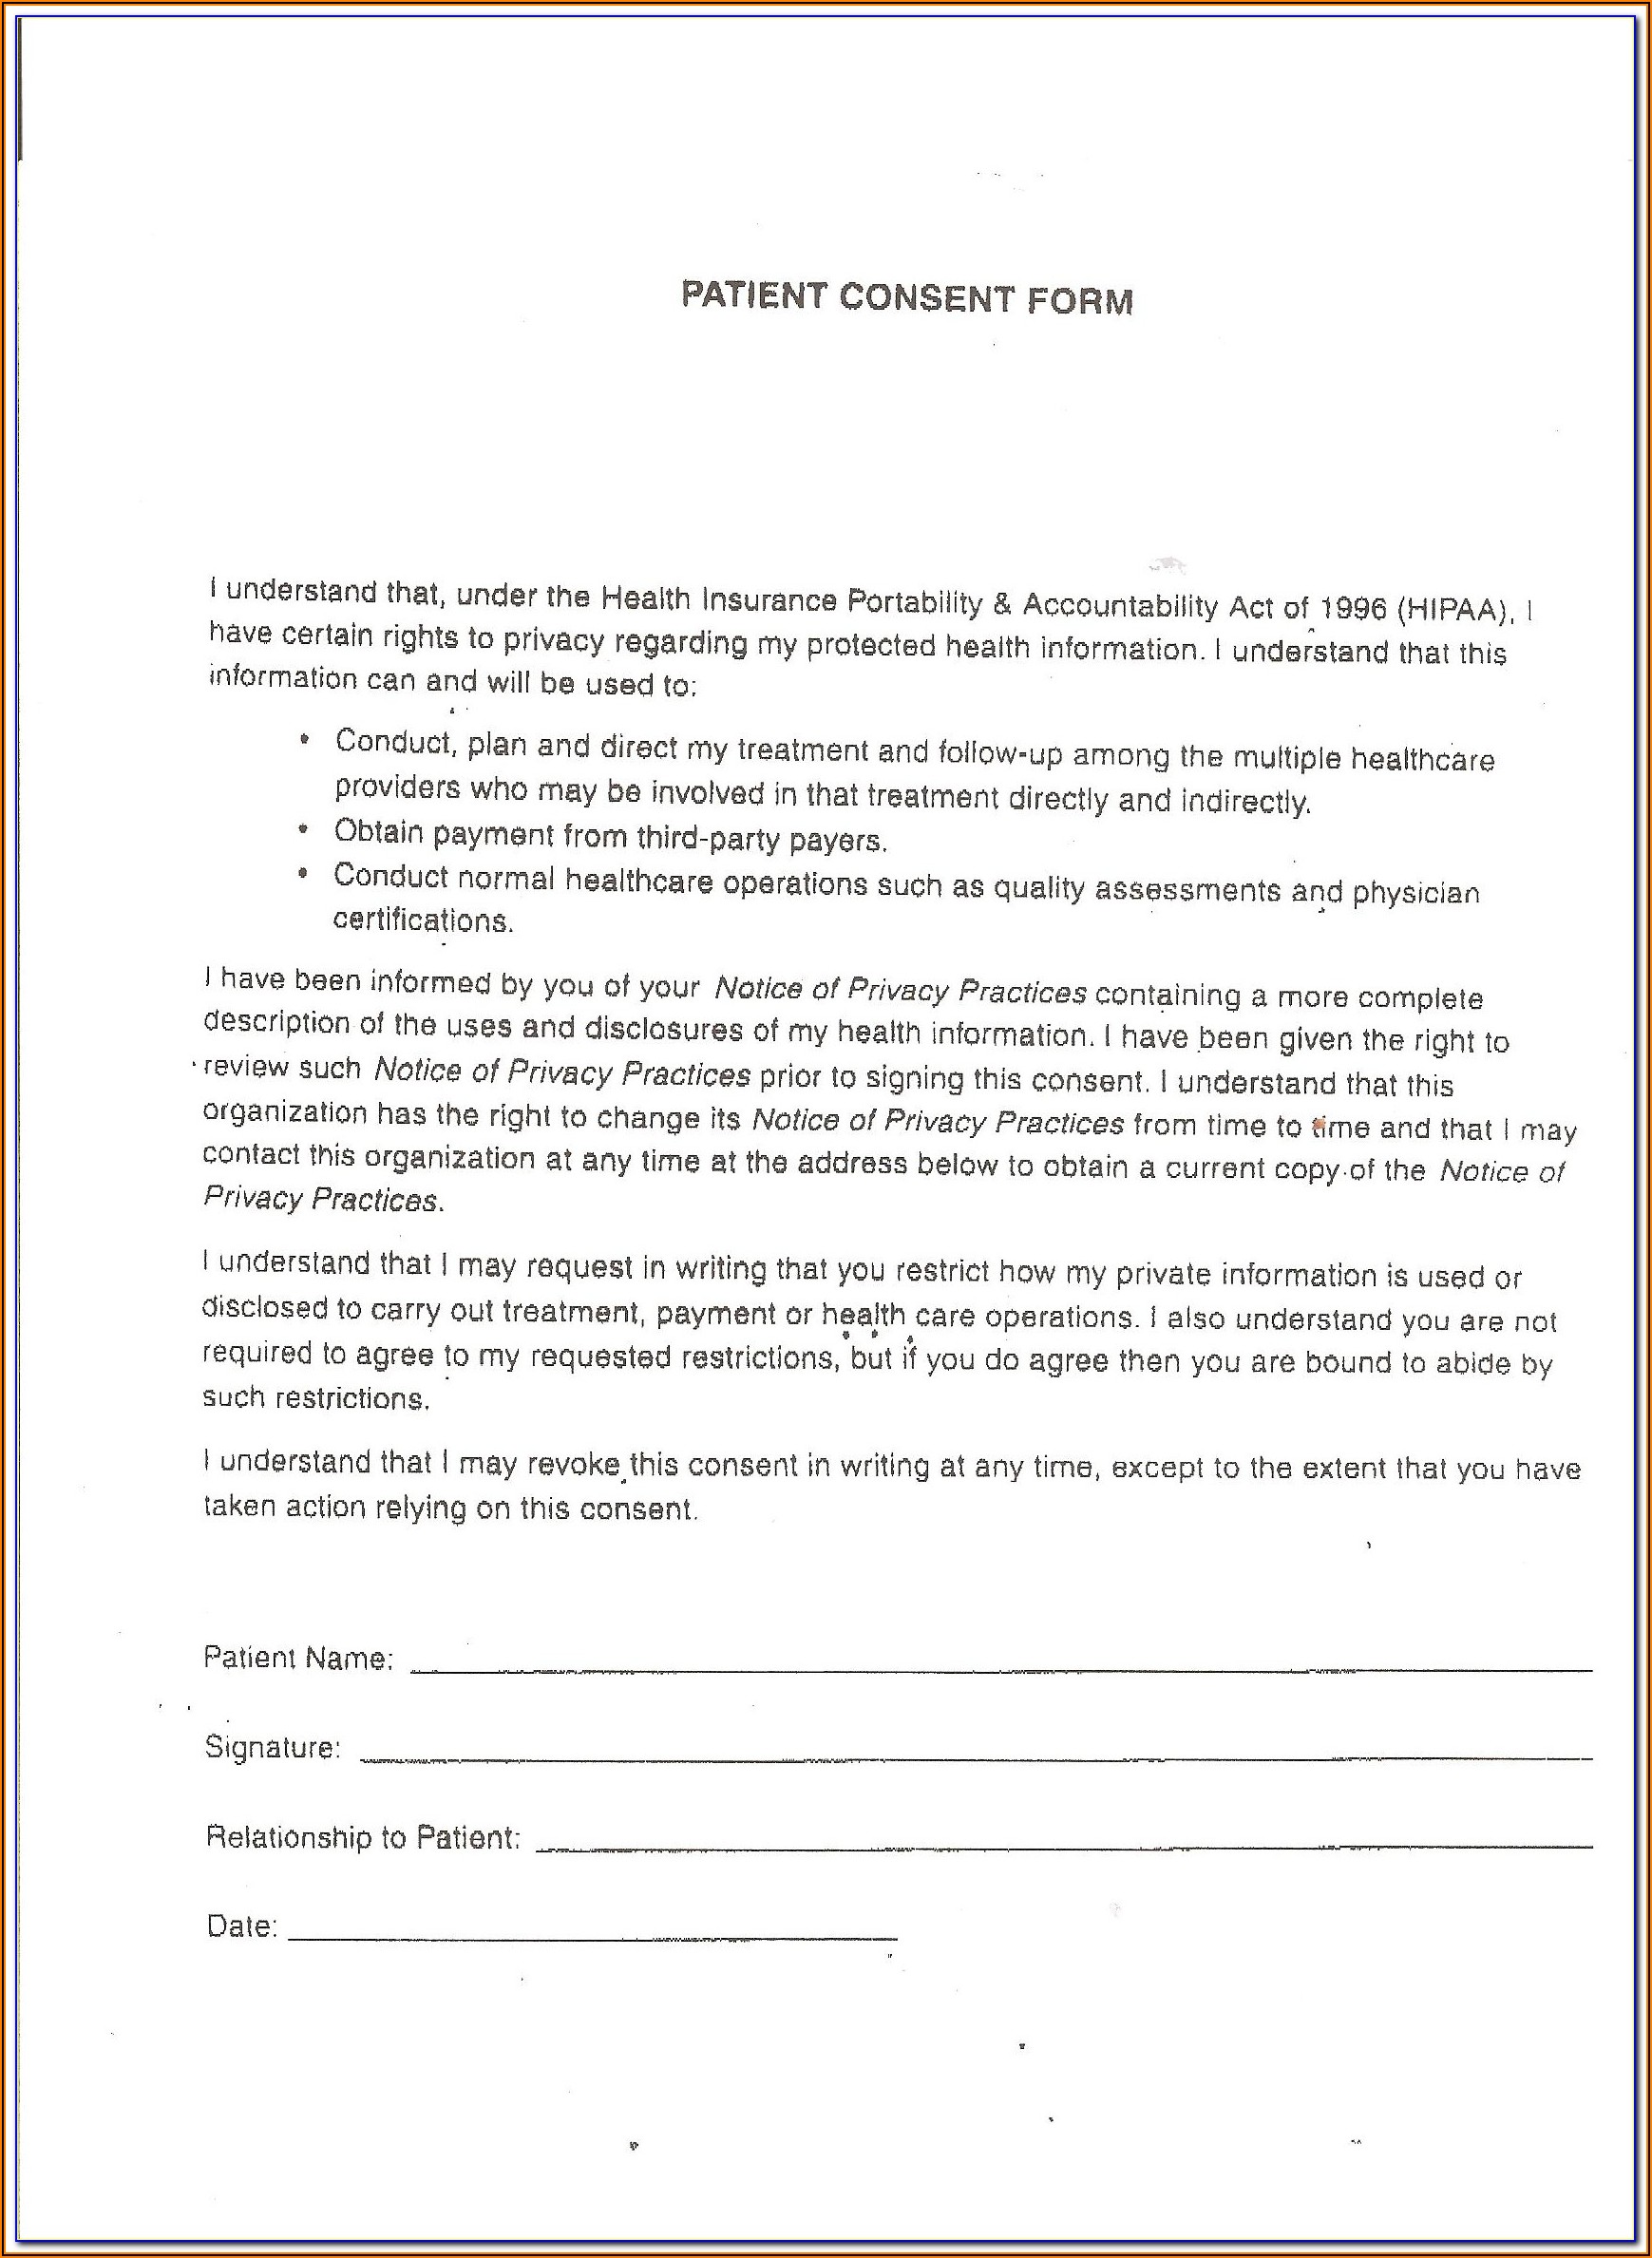 hipaa-compliance-patient-consent-form-spanish-form-resume-examples